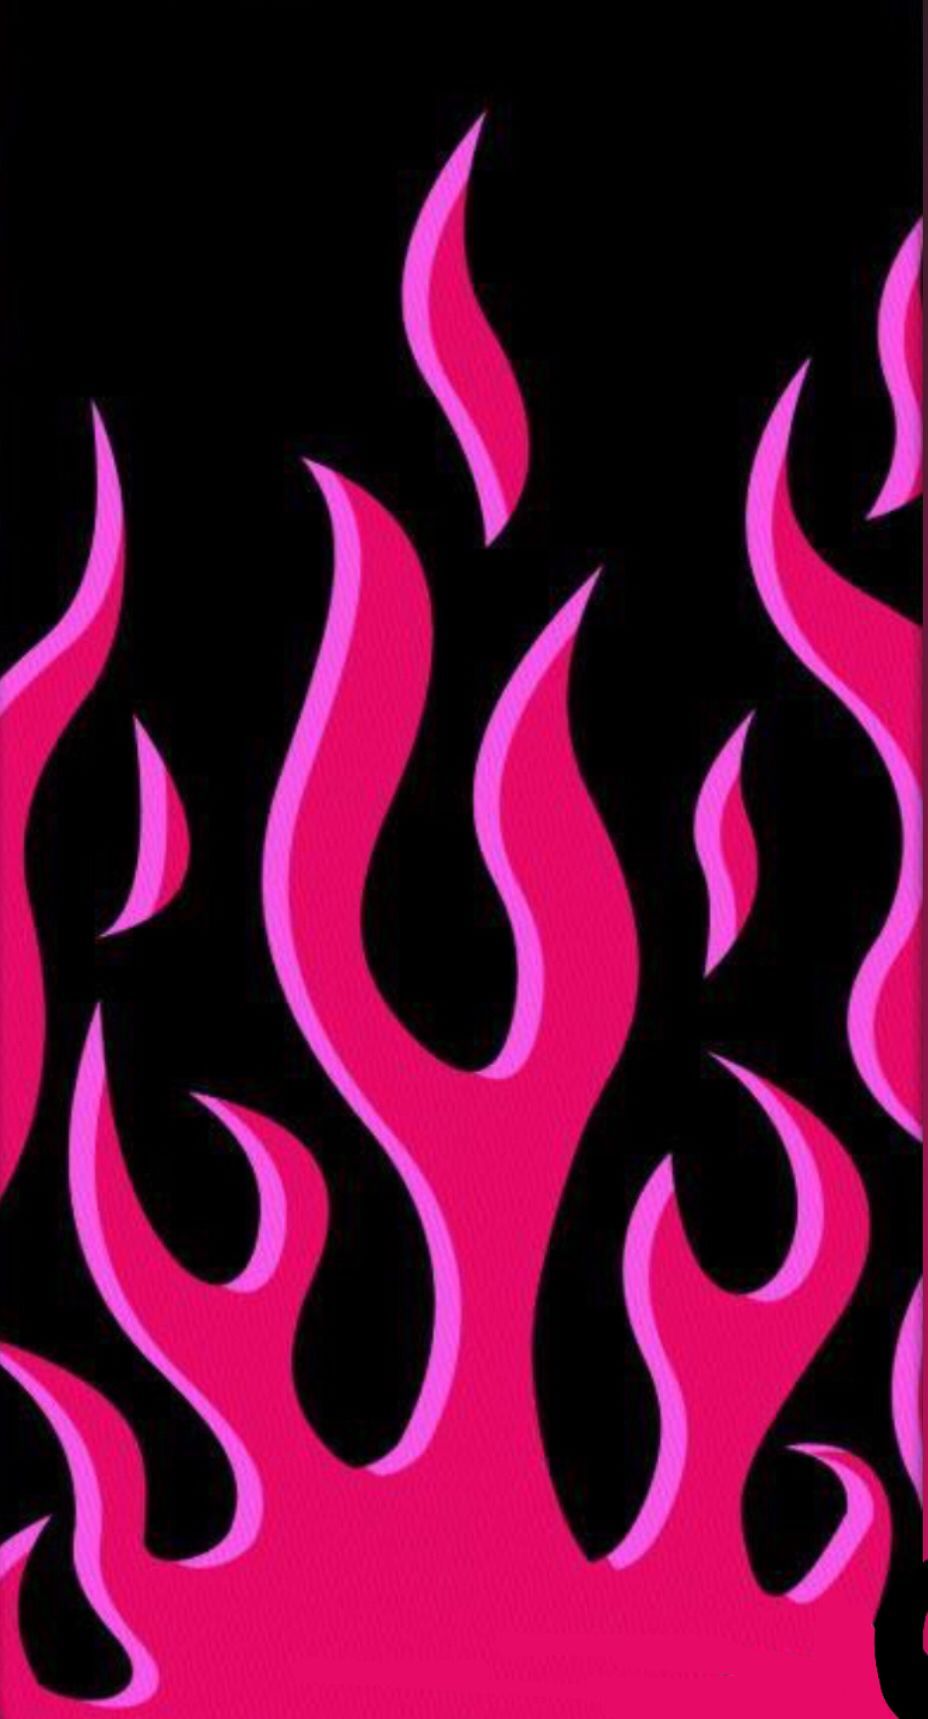 aesthetic flames wallpapers wallpaper cave on aesthetic flames wallpapers